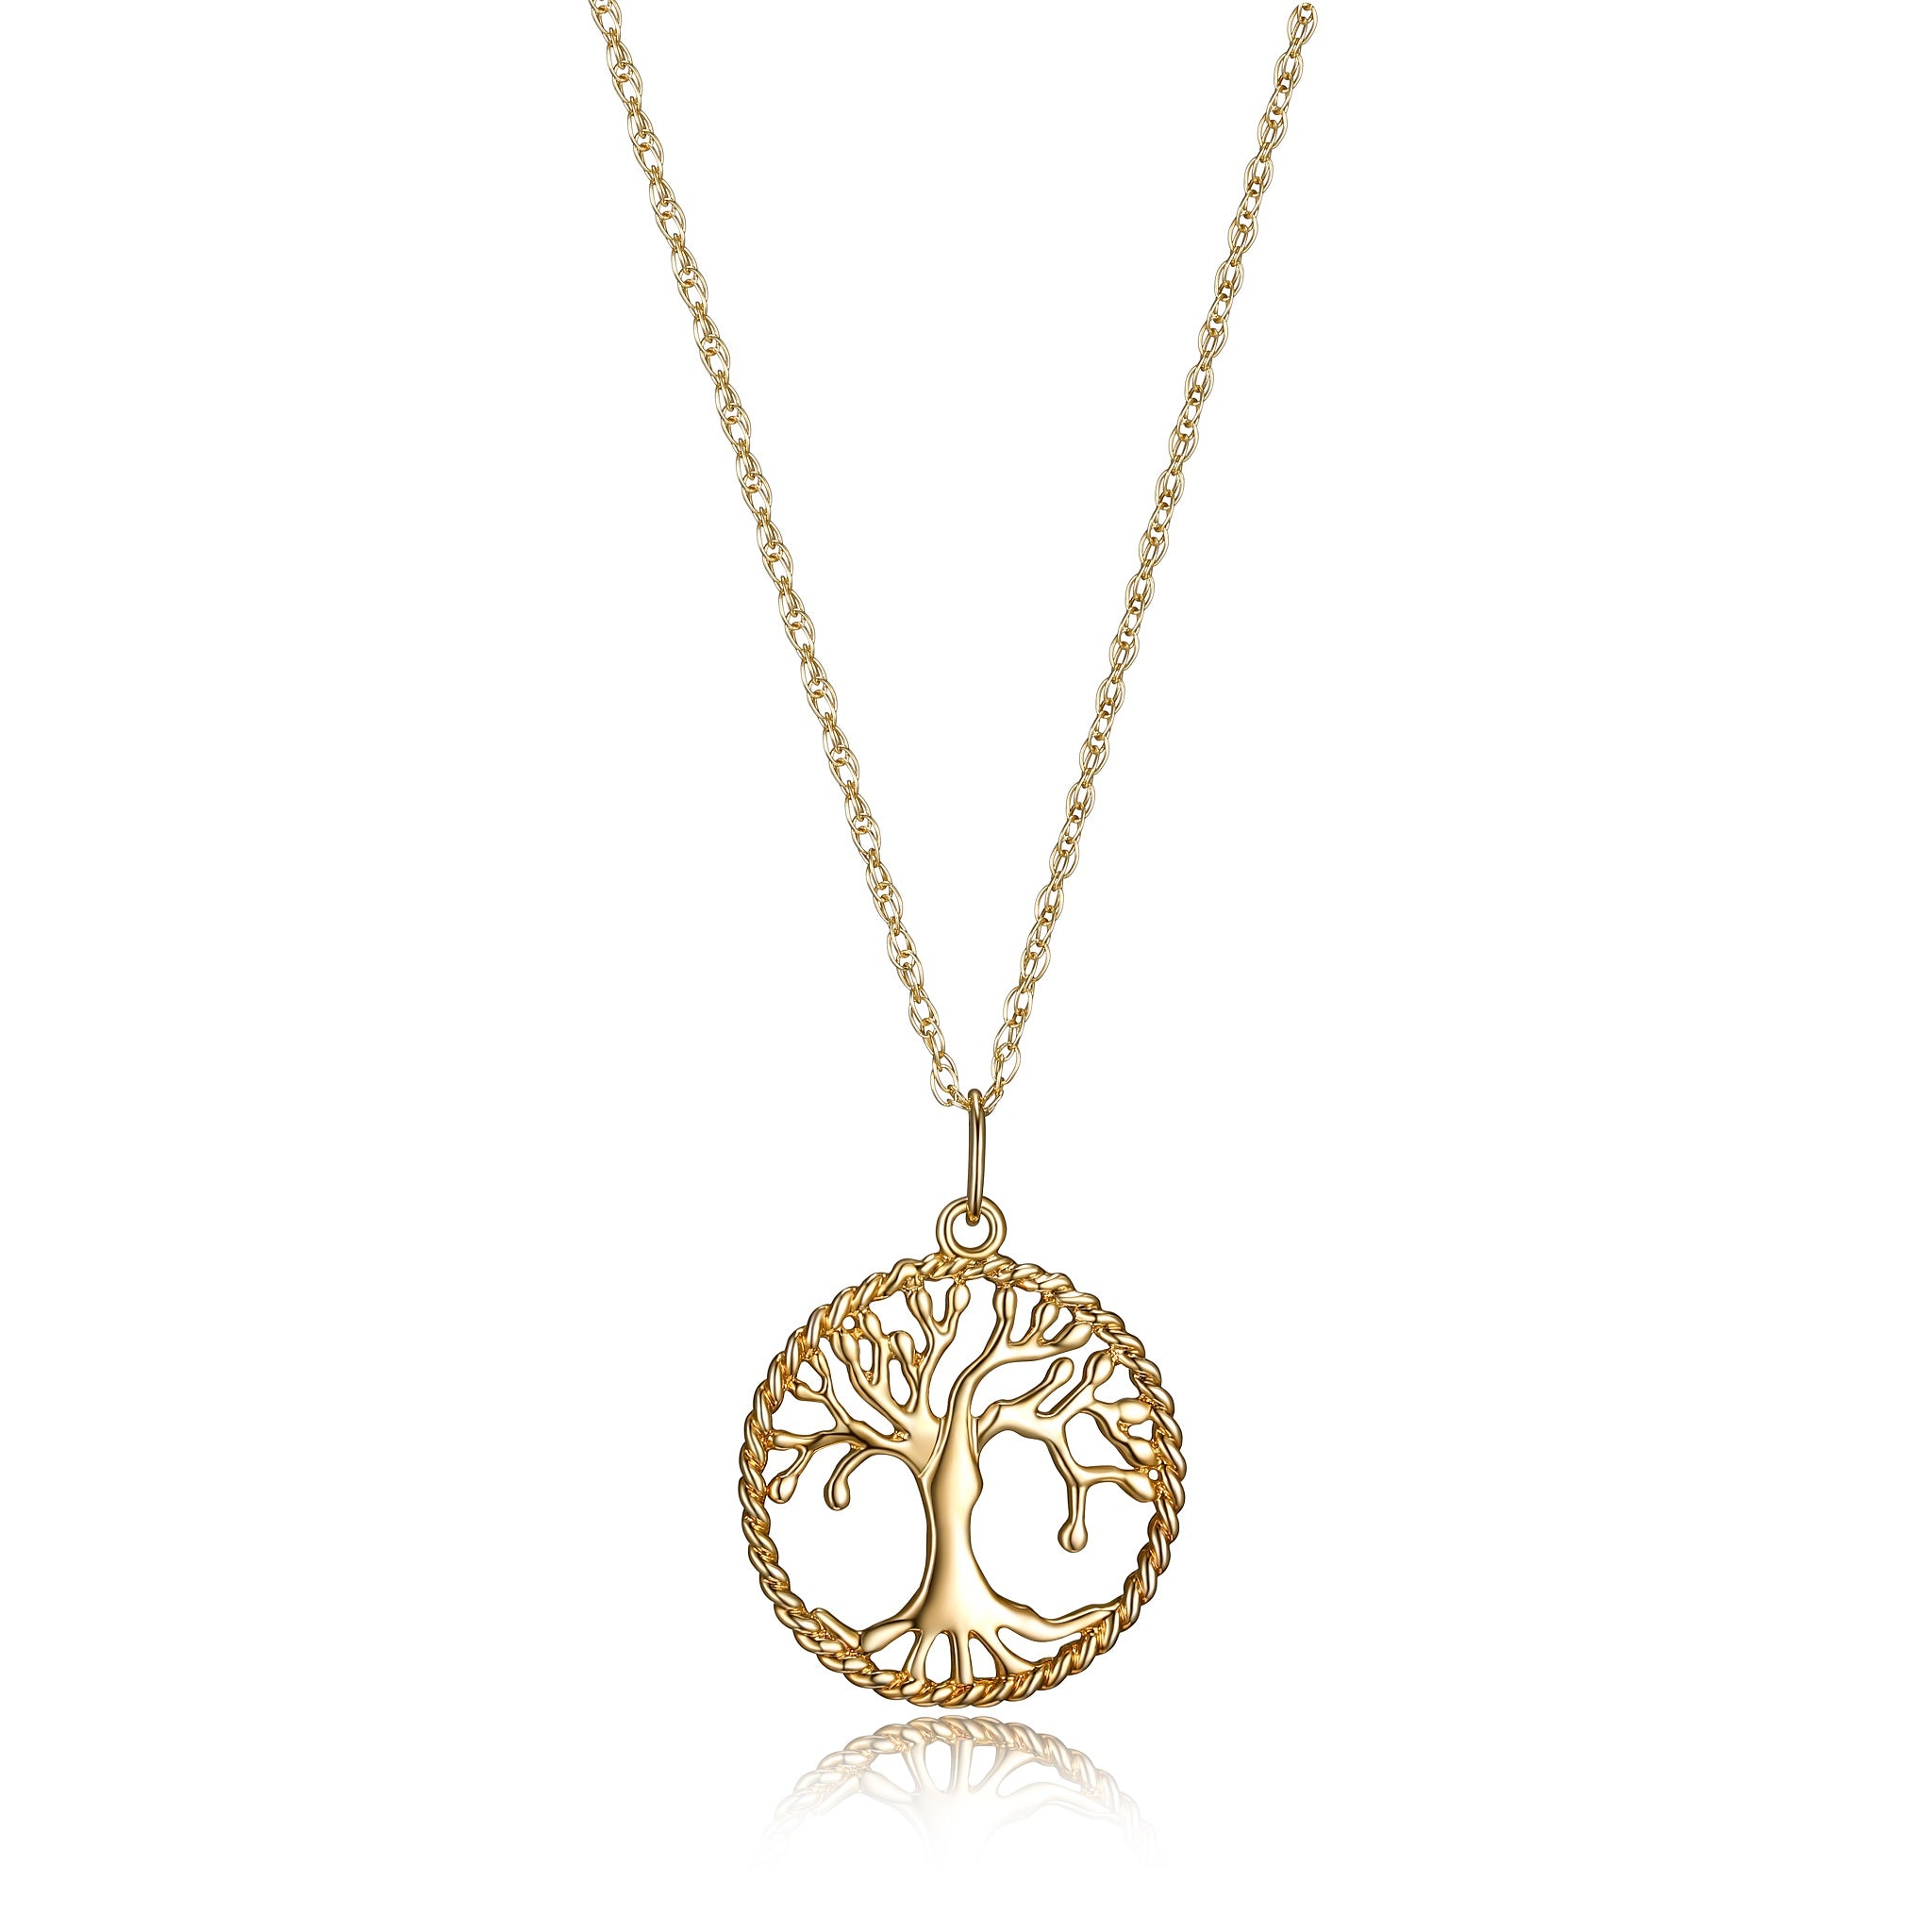 Reign 10k yellow gold tree necklace